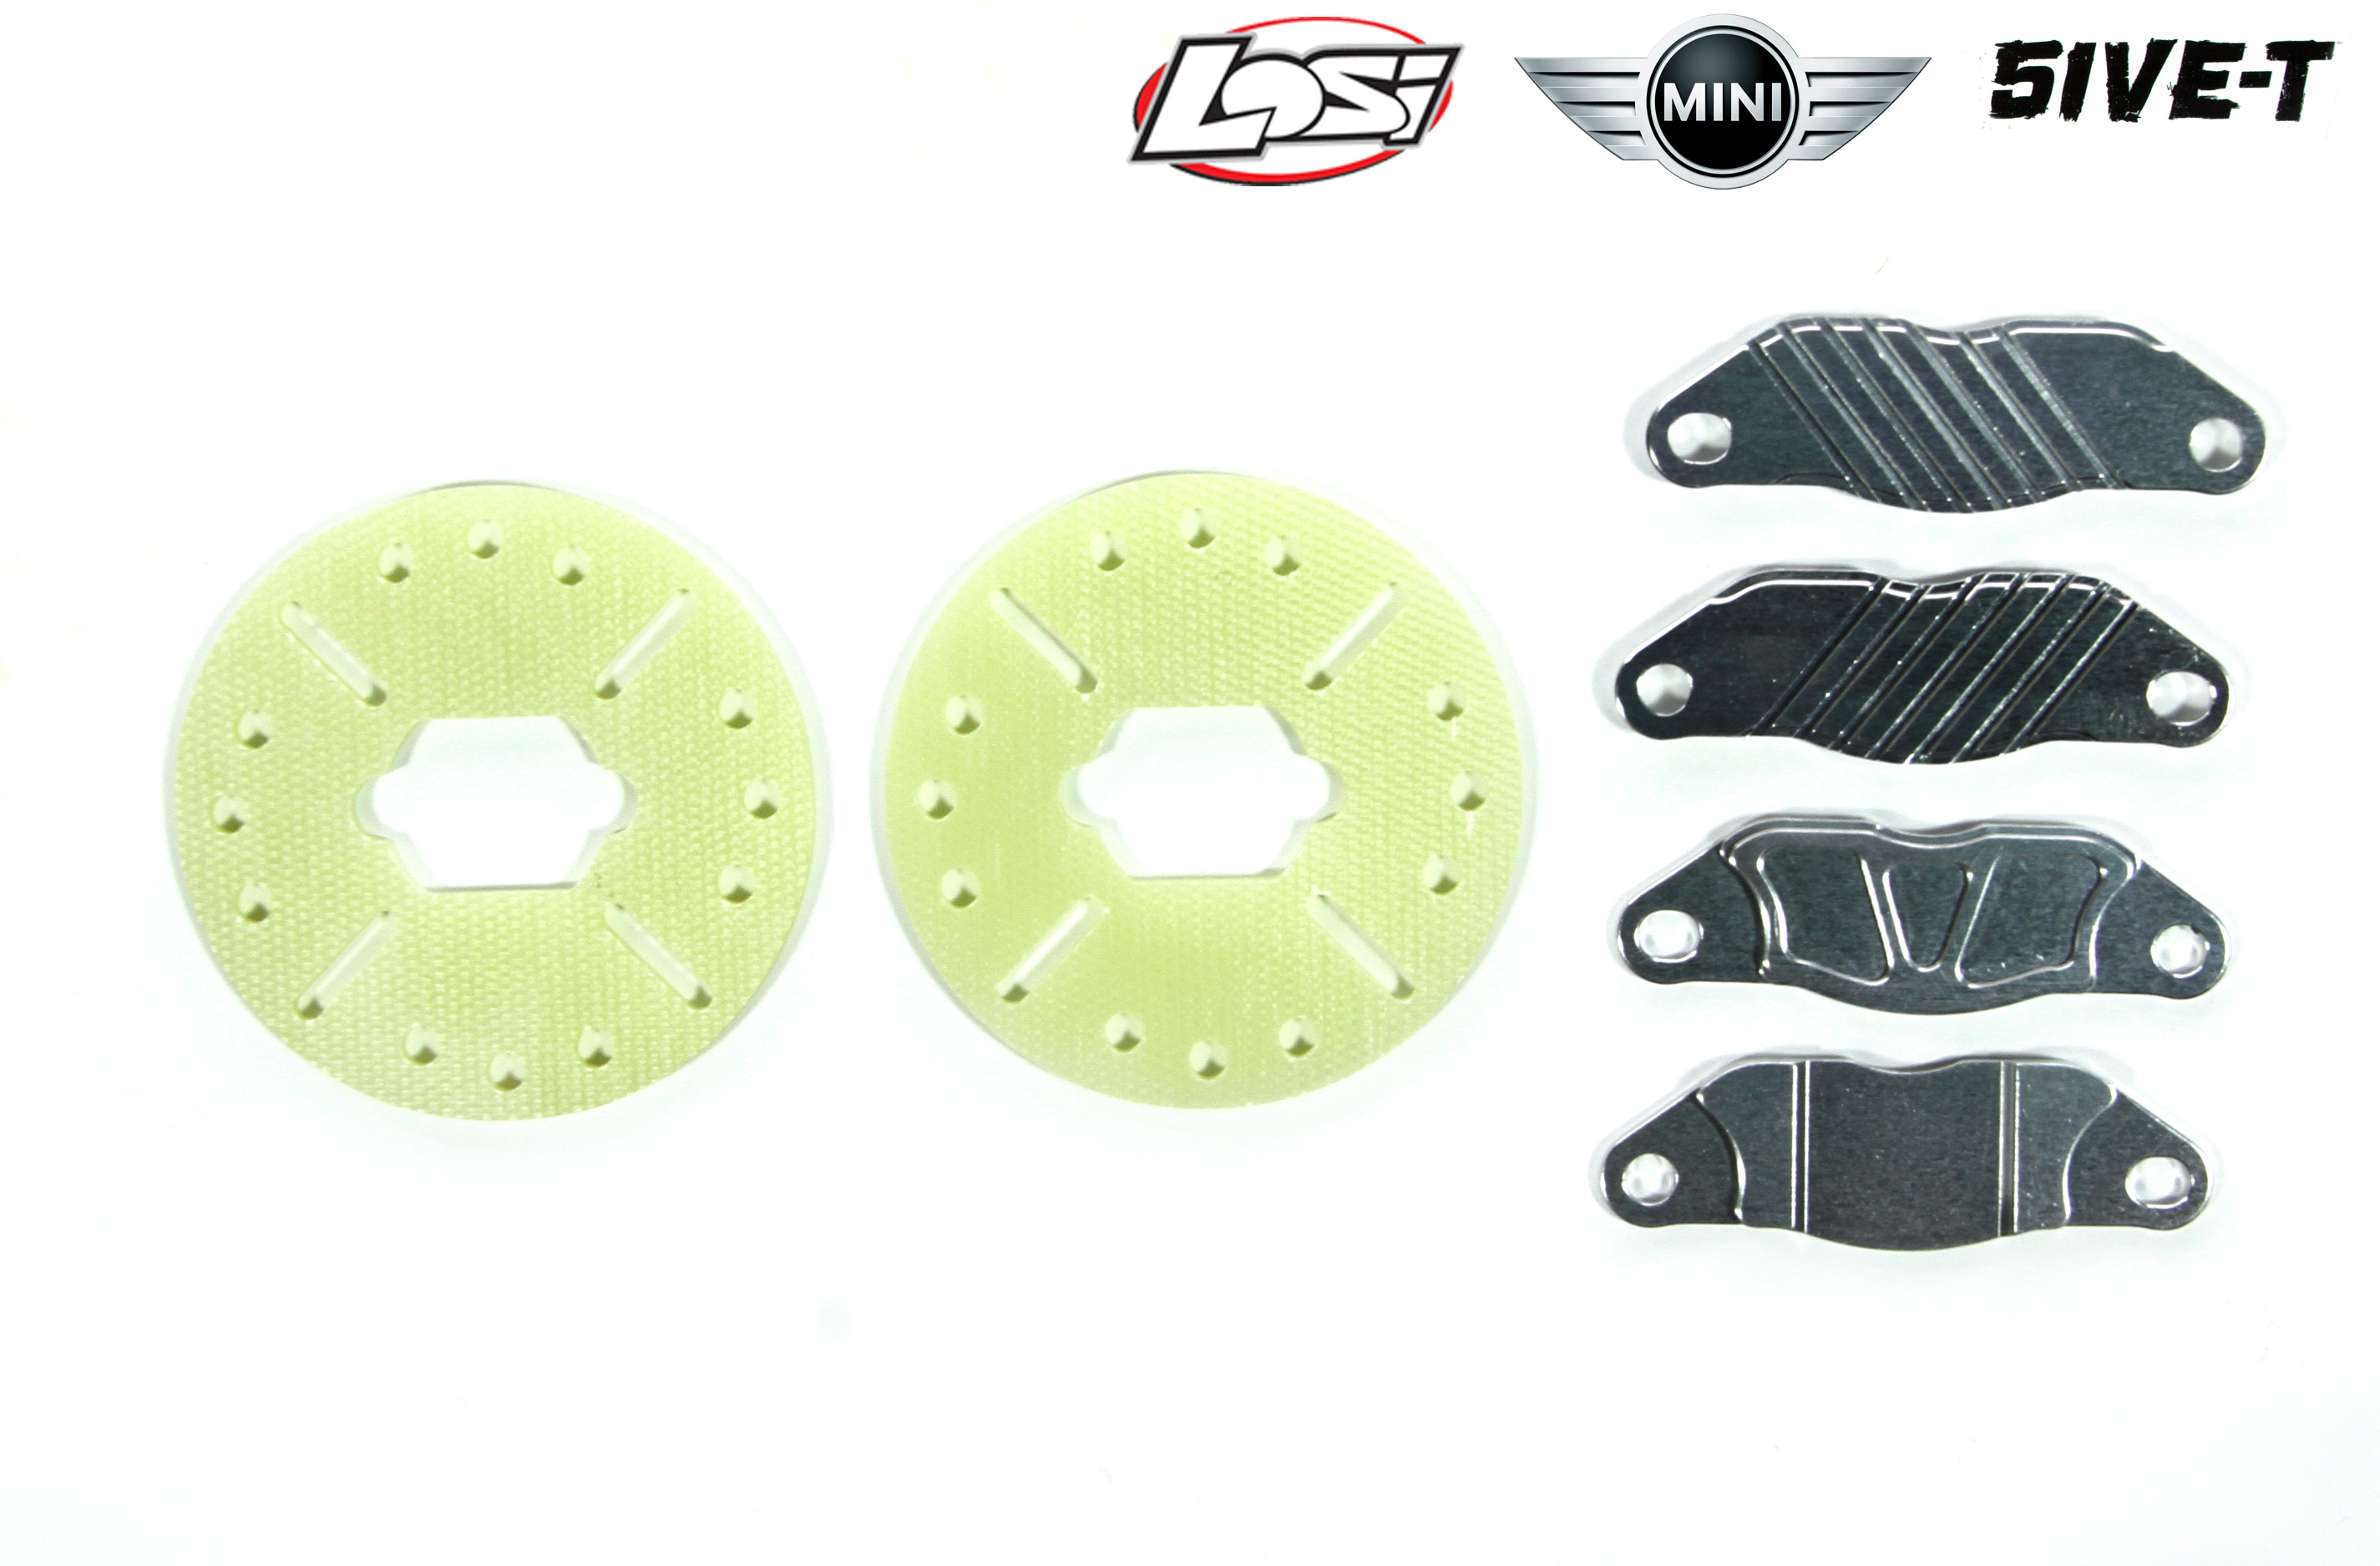 y1338/01 Epoxy P-R-M Race brake discs with GPM brake discs for Losi 5ive-T and Mini